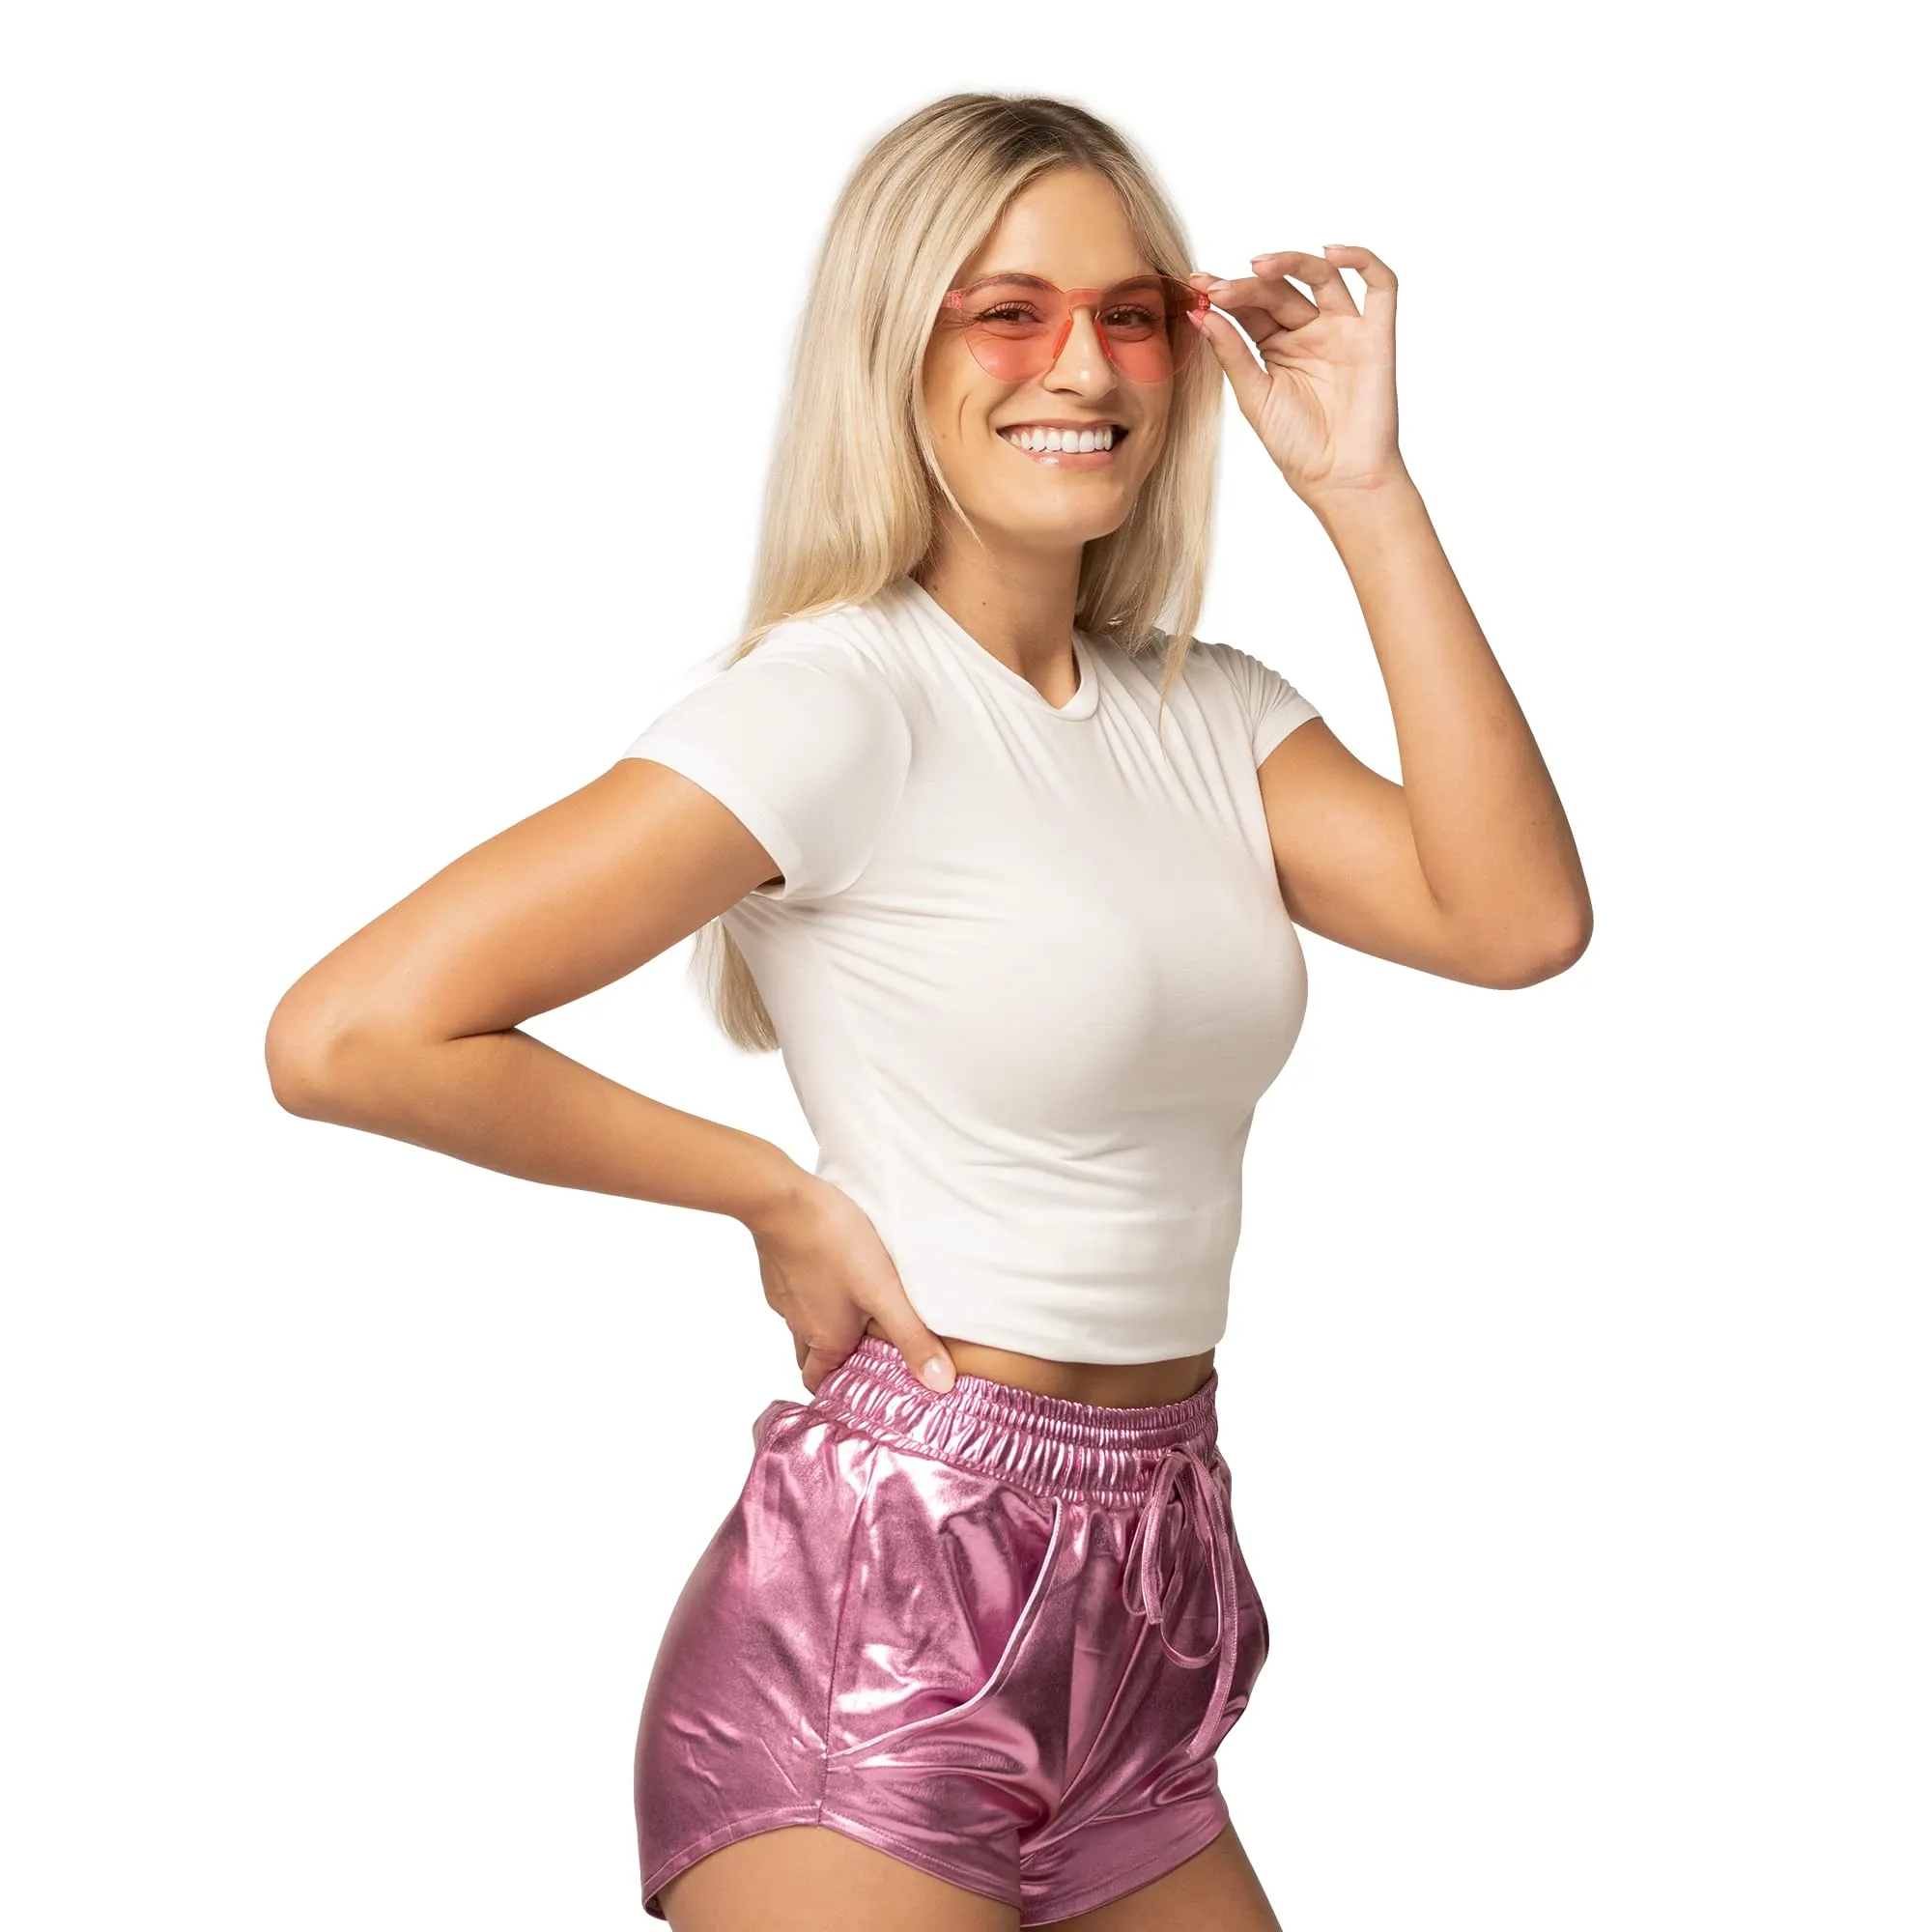 womens pink shorts outfit